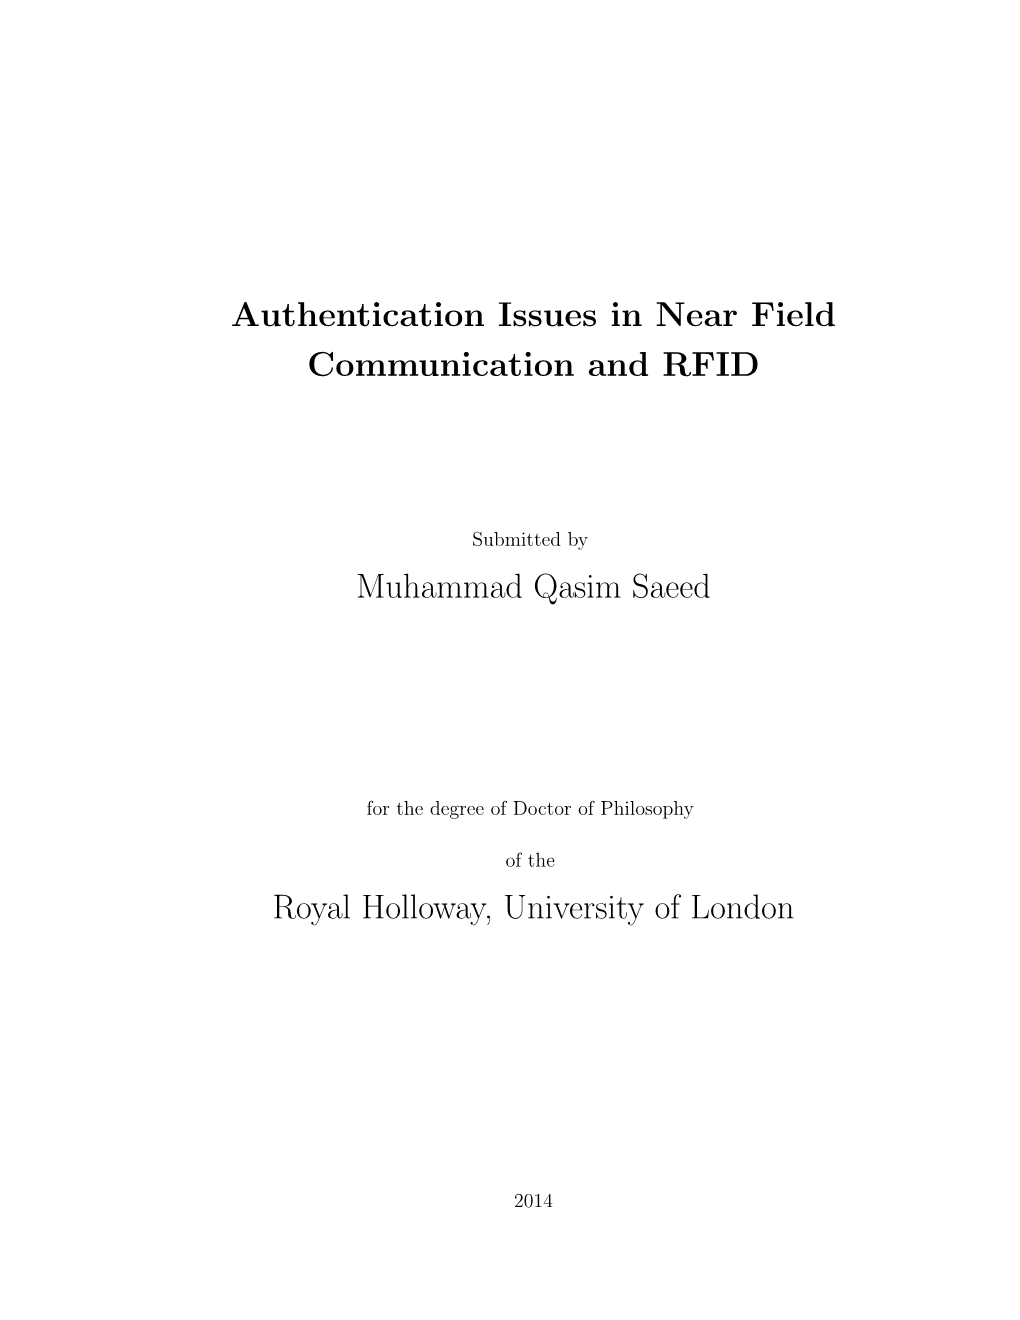 Authentication Issues in Near Field Communication and RFID